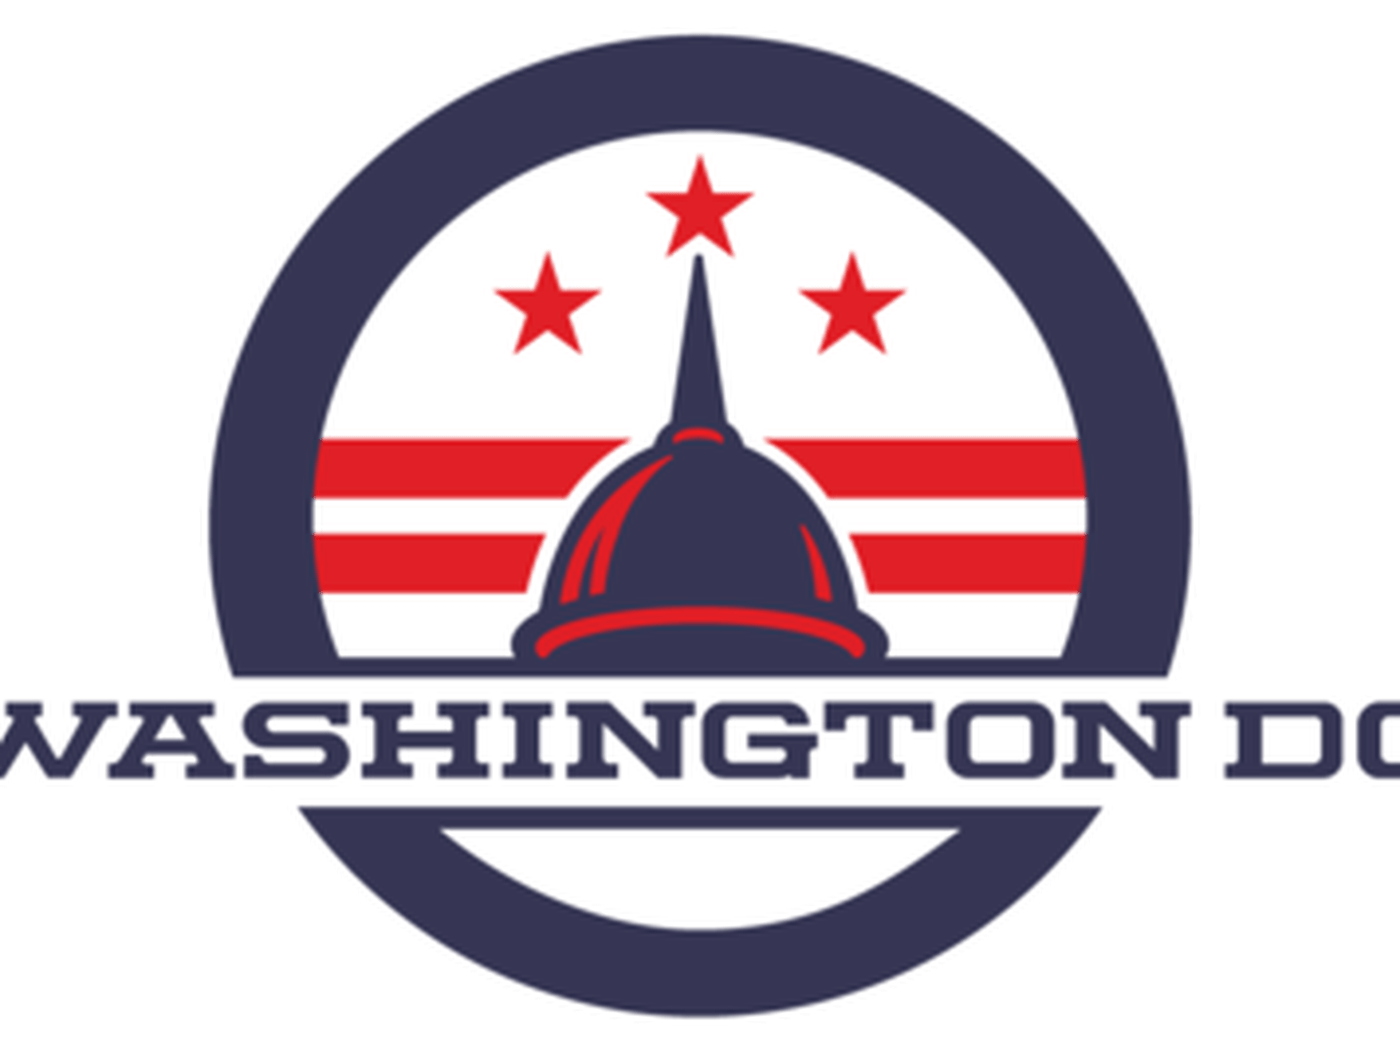 Washington DC Logo - More Picture Of The Wizards New Jerseys And Logos Nation DC